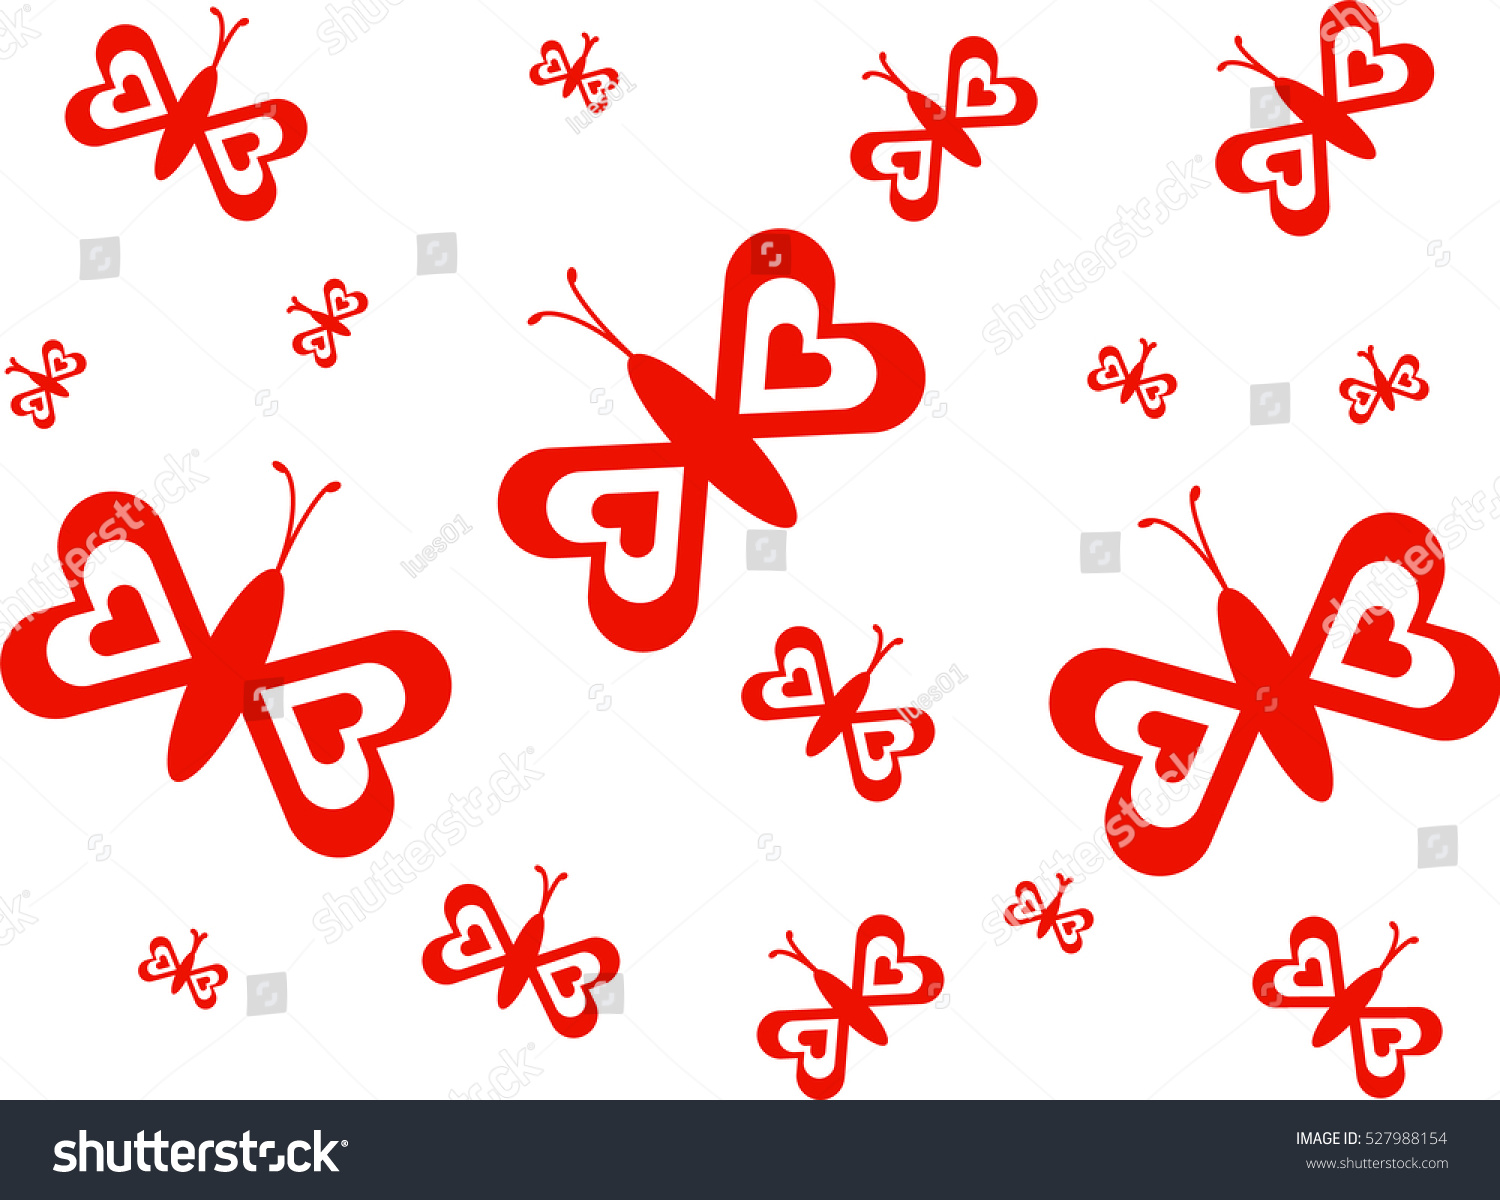 Download Butterfly Swarm Stock Vector Illustration 527988154 ...